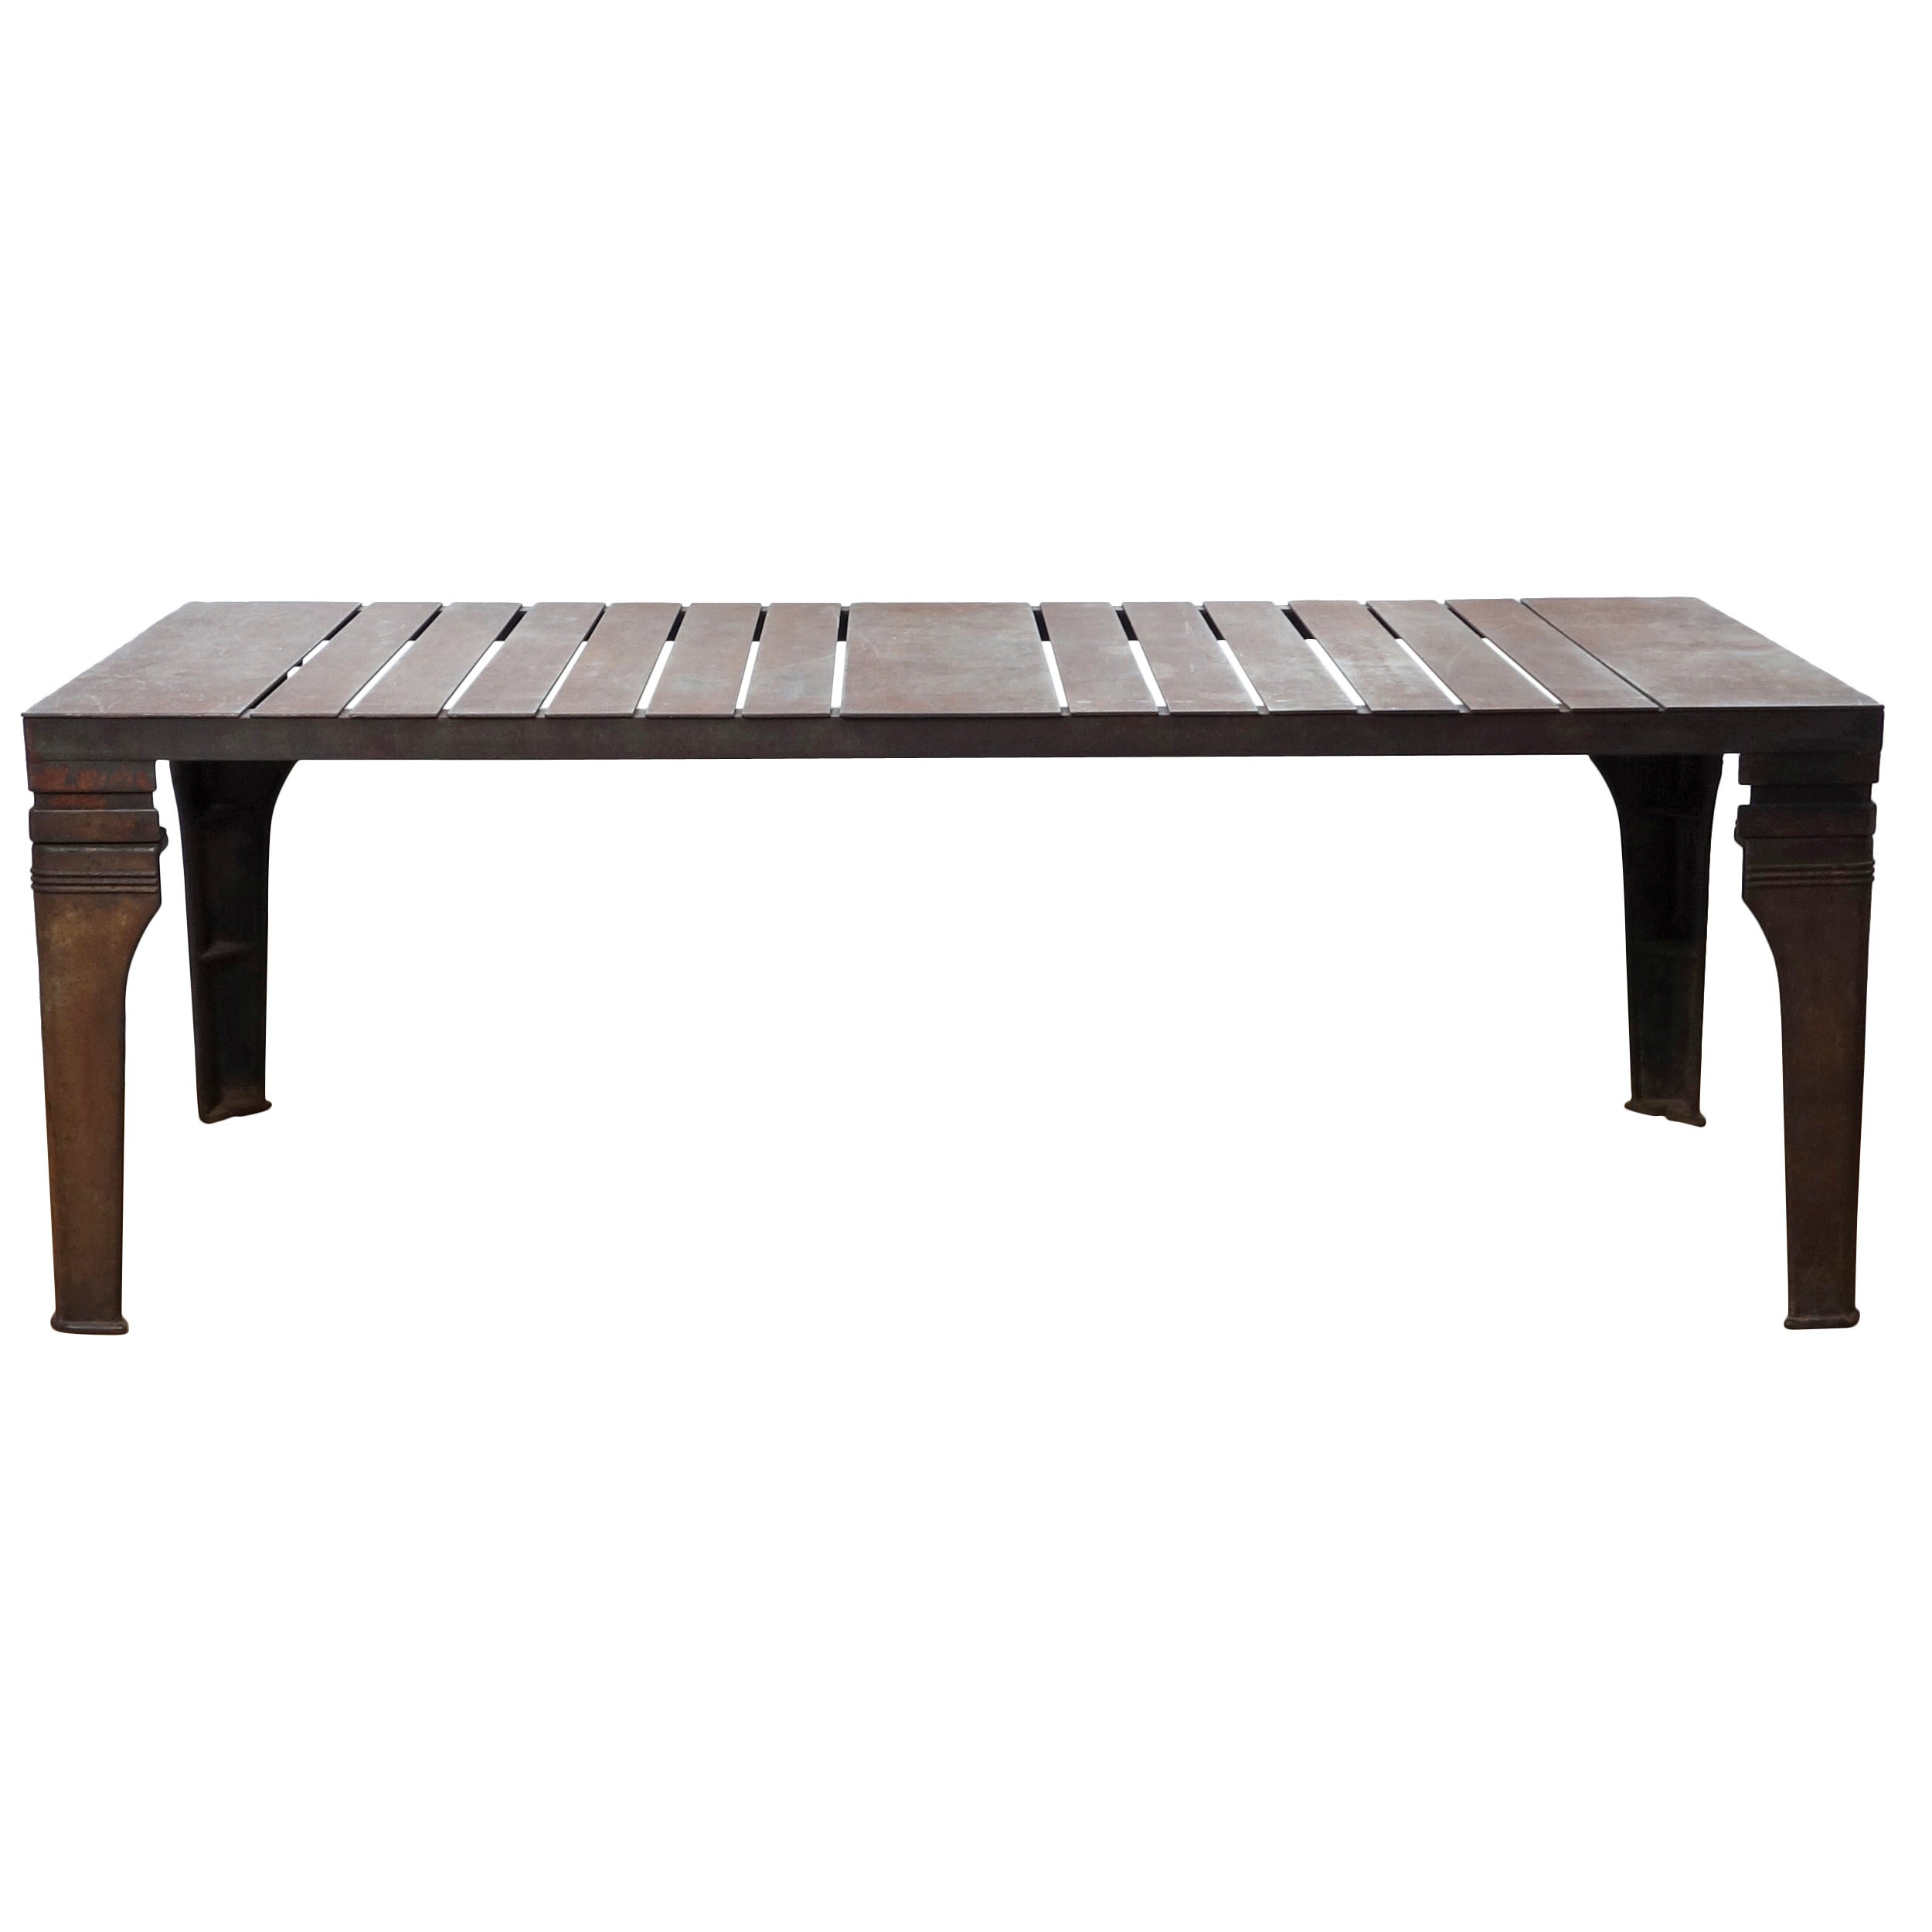 Large Industrial Steel Dining Table